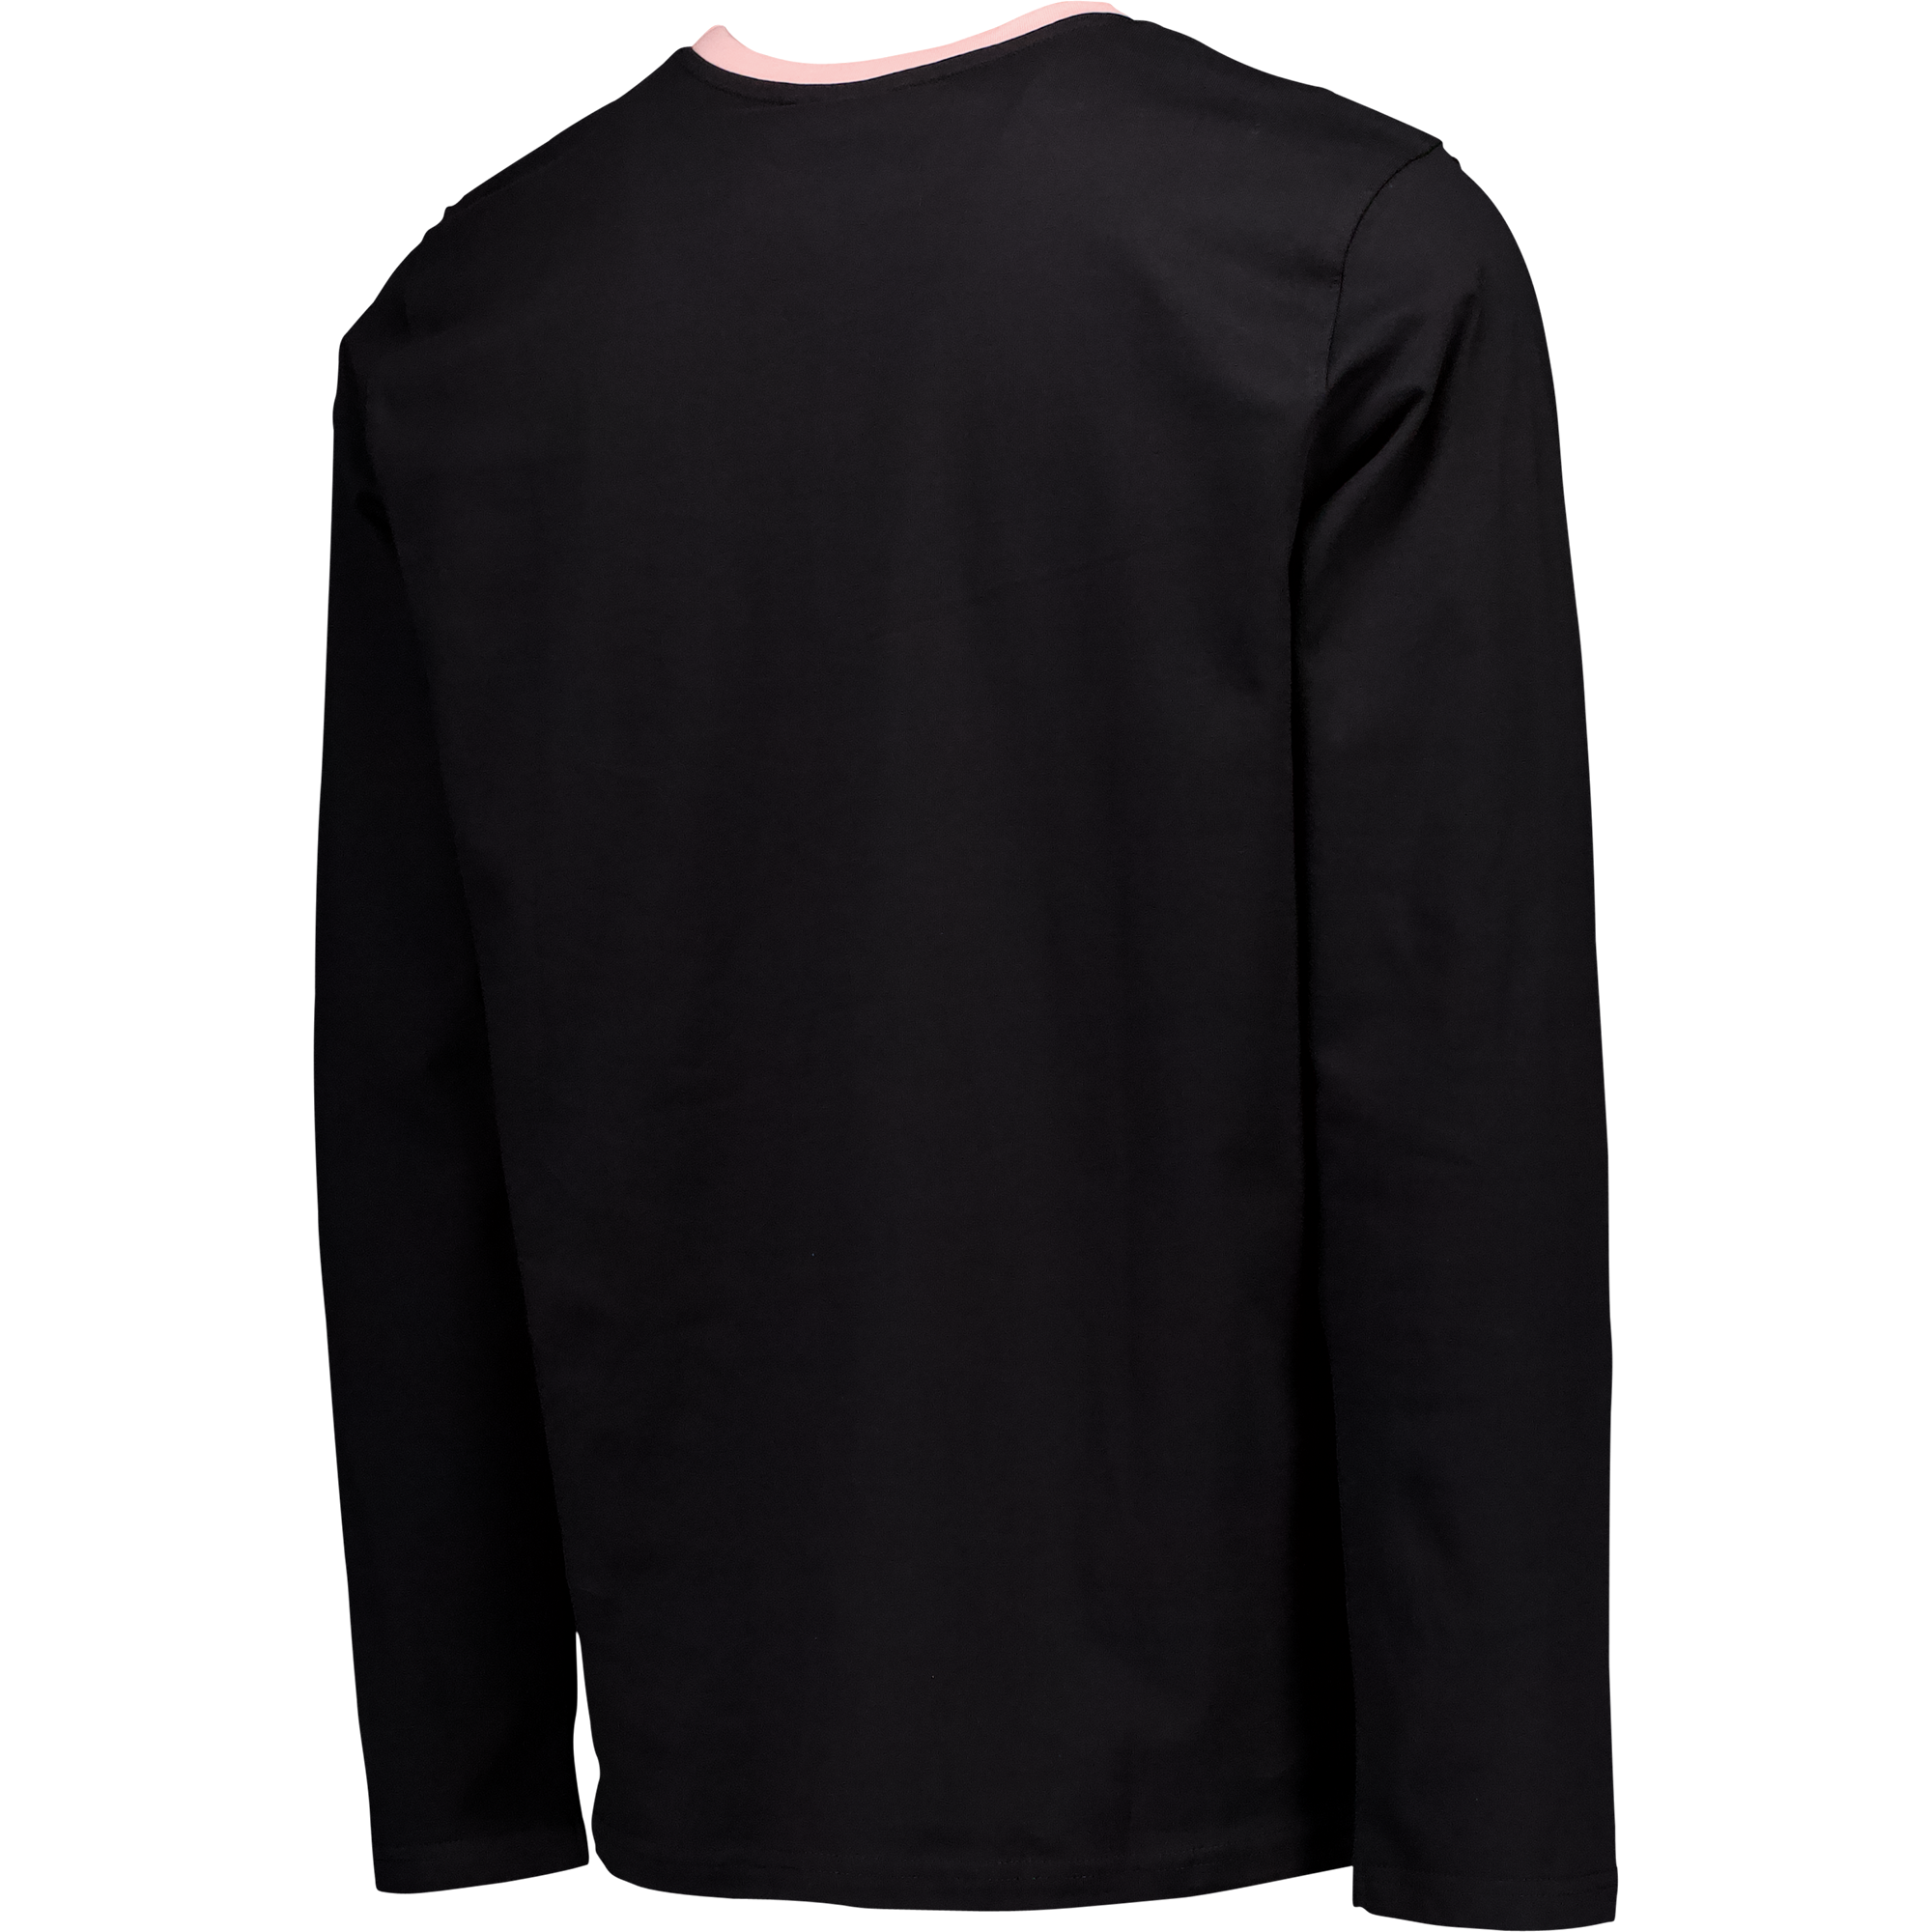 Angel City FC Unisex Black Relaxed Fit Long-Sleeve T-Shirt